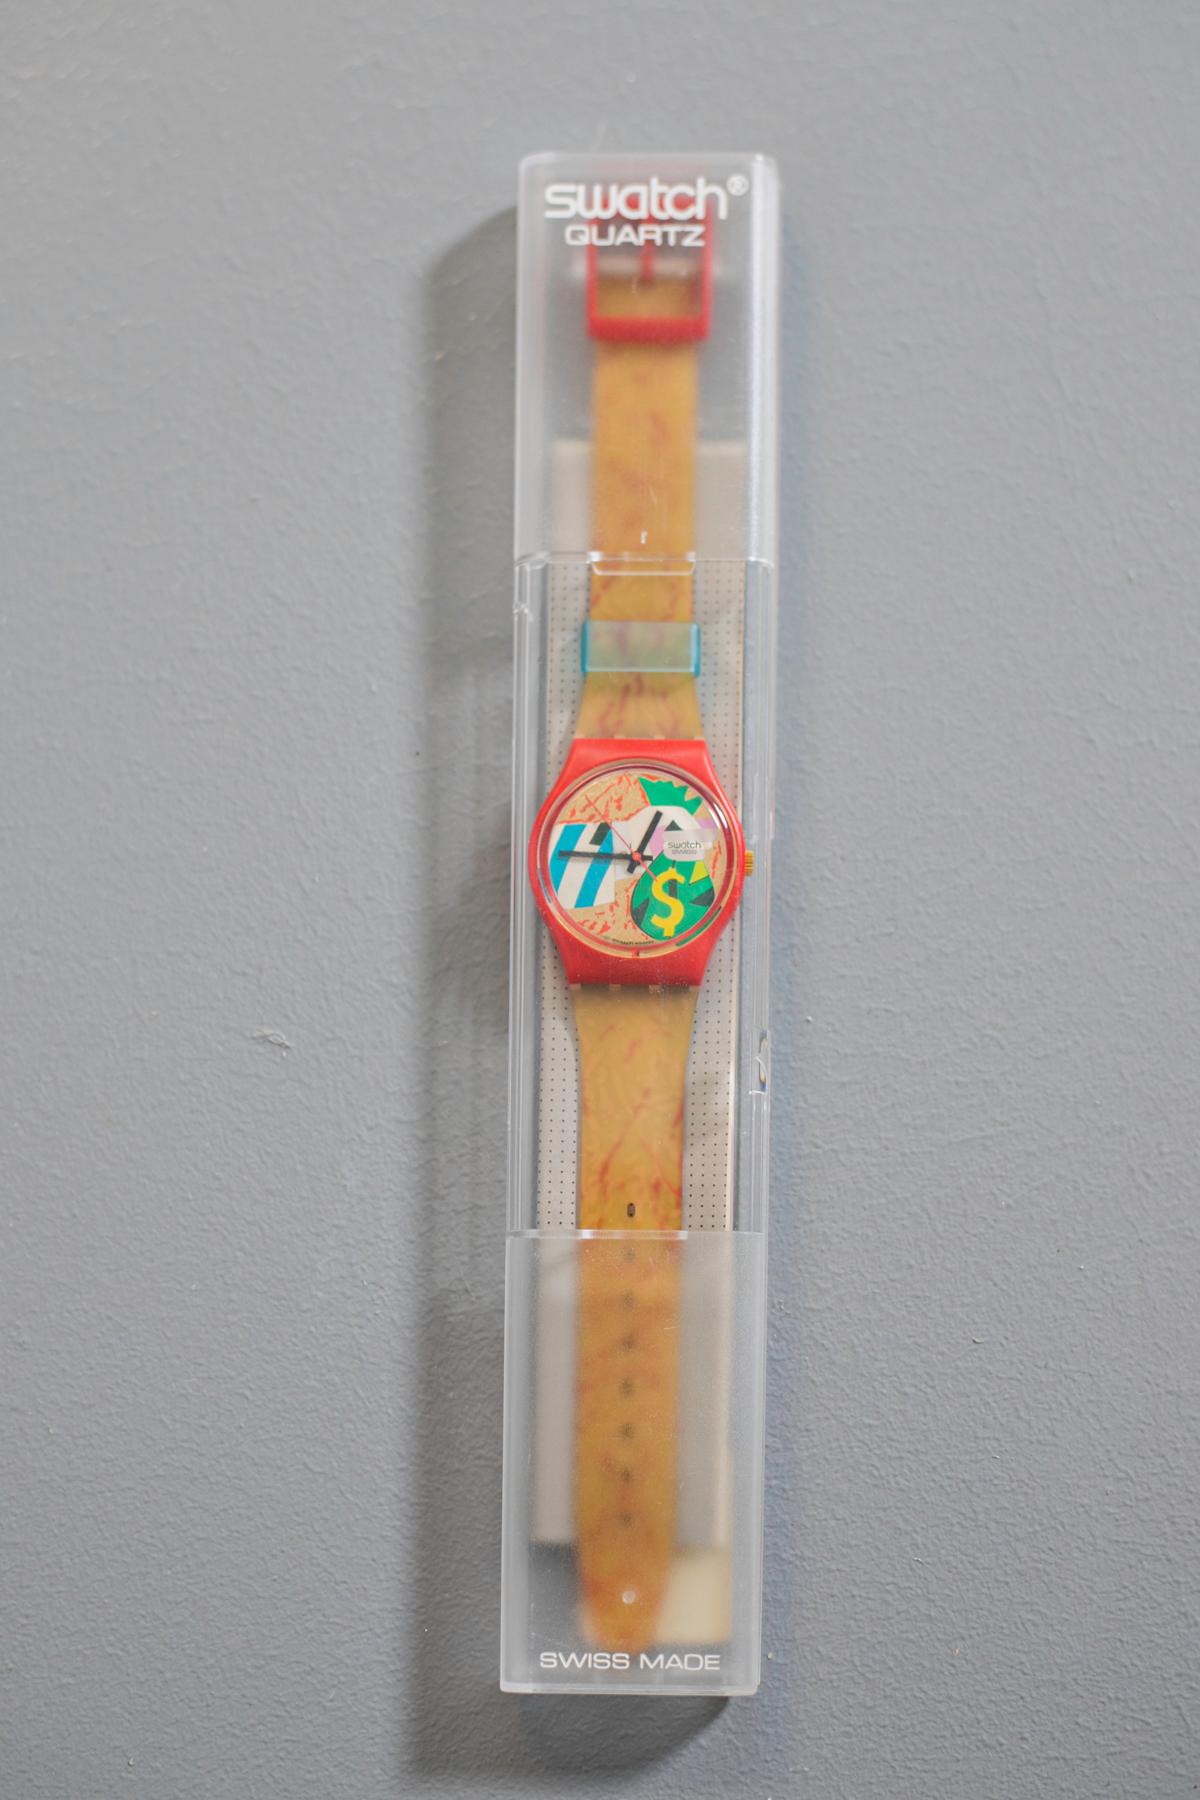 Nice vintage Swatch from the 1993 collection. In the dial you can see the hand of a thief with his loot, a bag full of money. Perhaps to remind the wearer that time is money?

Case Material: Plastic
Strap Material: Plastic
Movement: Not